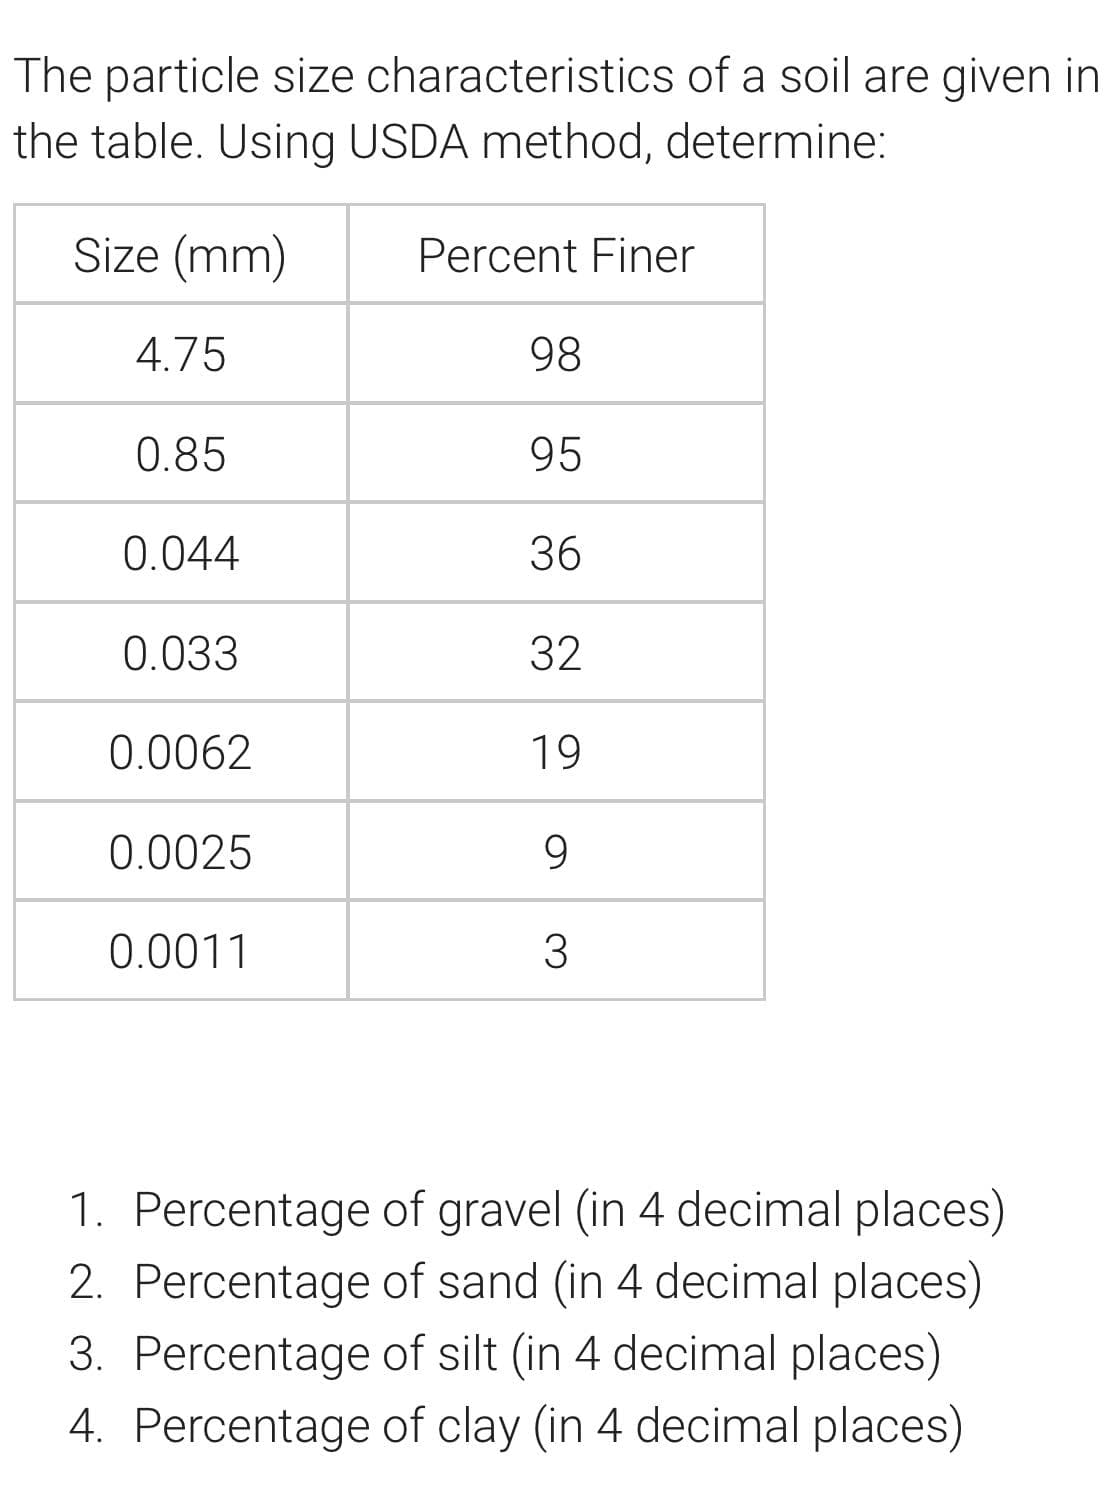 The particle size characteristics of a soil are given in
the table. Using USDA method, determine:
Size (mm)
Percent Finer
4.75
98
0.85
95
0.044
36
0.033
32
0.0062
19
0.0025
9.
0.0011
1. Percentage of gravel (in 4 decimal places)
2. Percentage of sand (in 4 decimal places)
3. Percentage of silt (in 4 decimal places)
4. Percentage of clay (in 4 decimal places)
